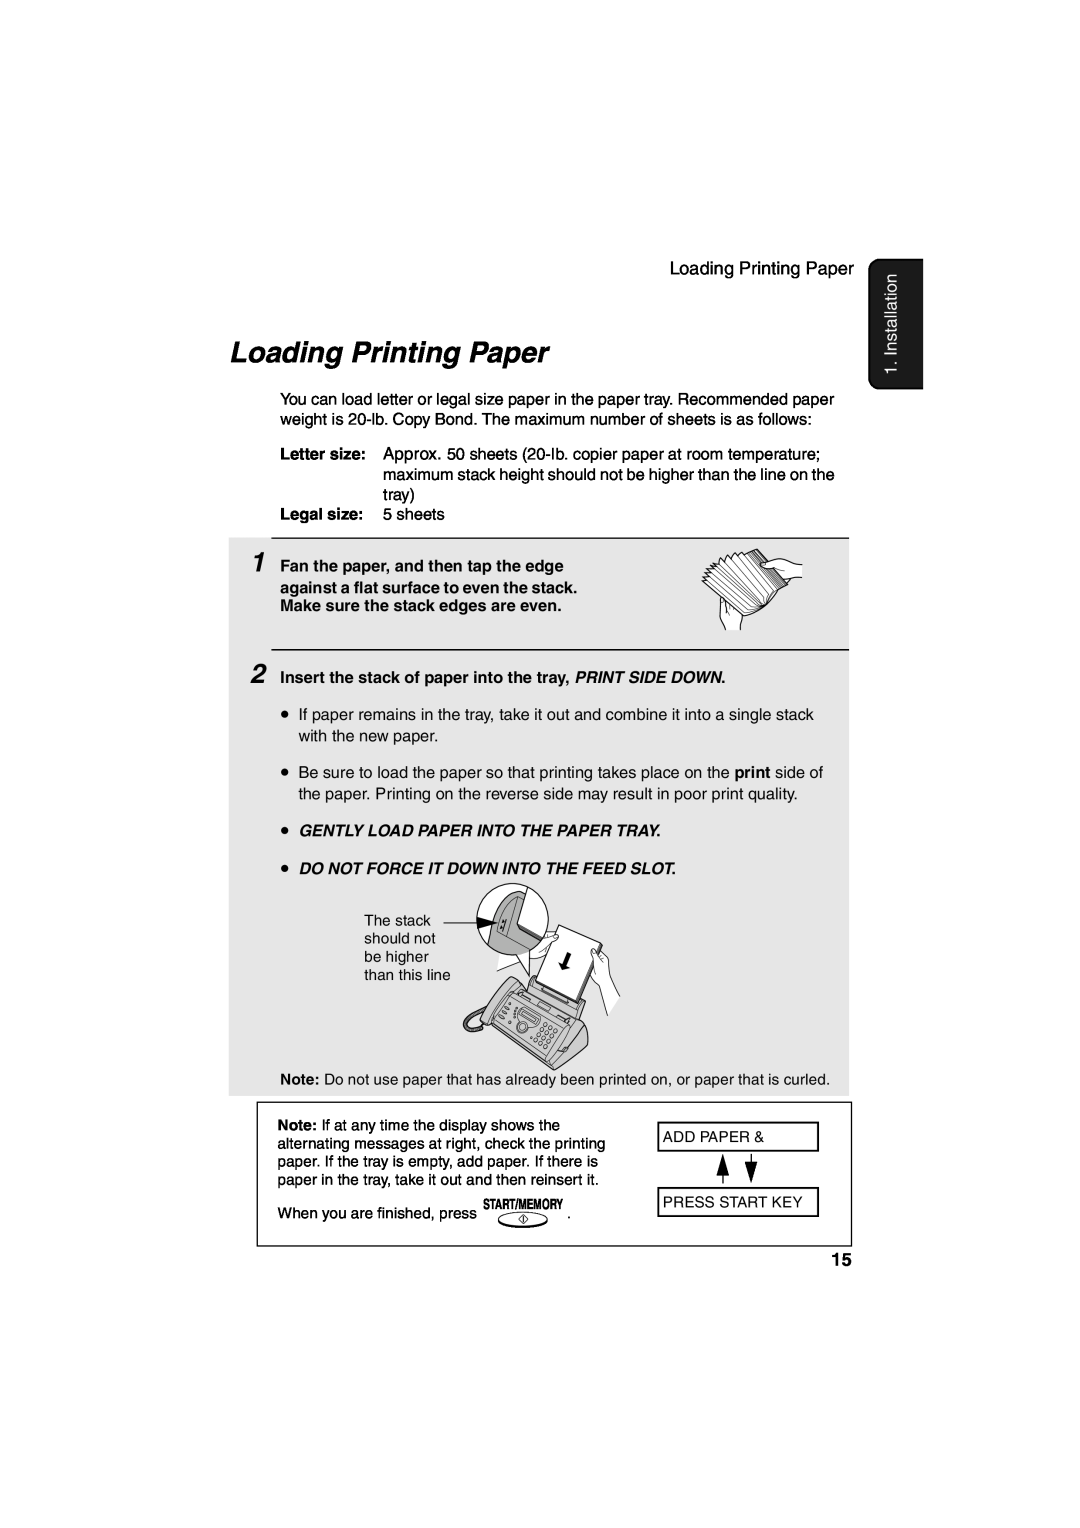 Sharp UX-A260 manual Loading Printing Paper, Installation, Gently Load Paper Into The Paper Tray 